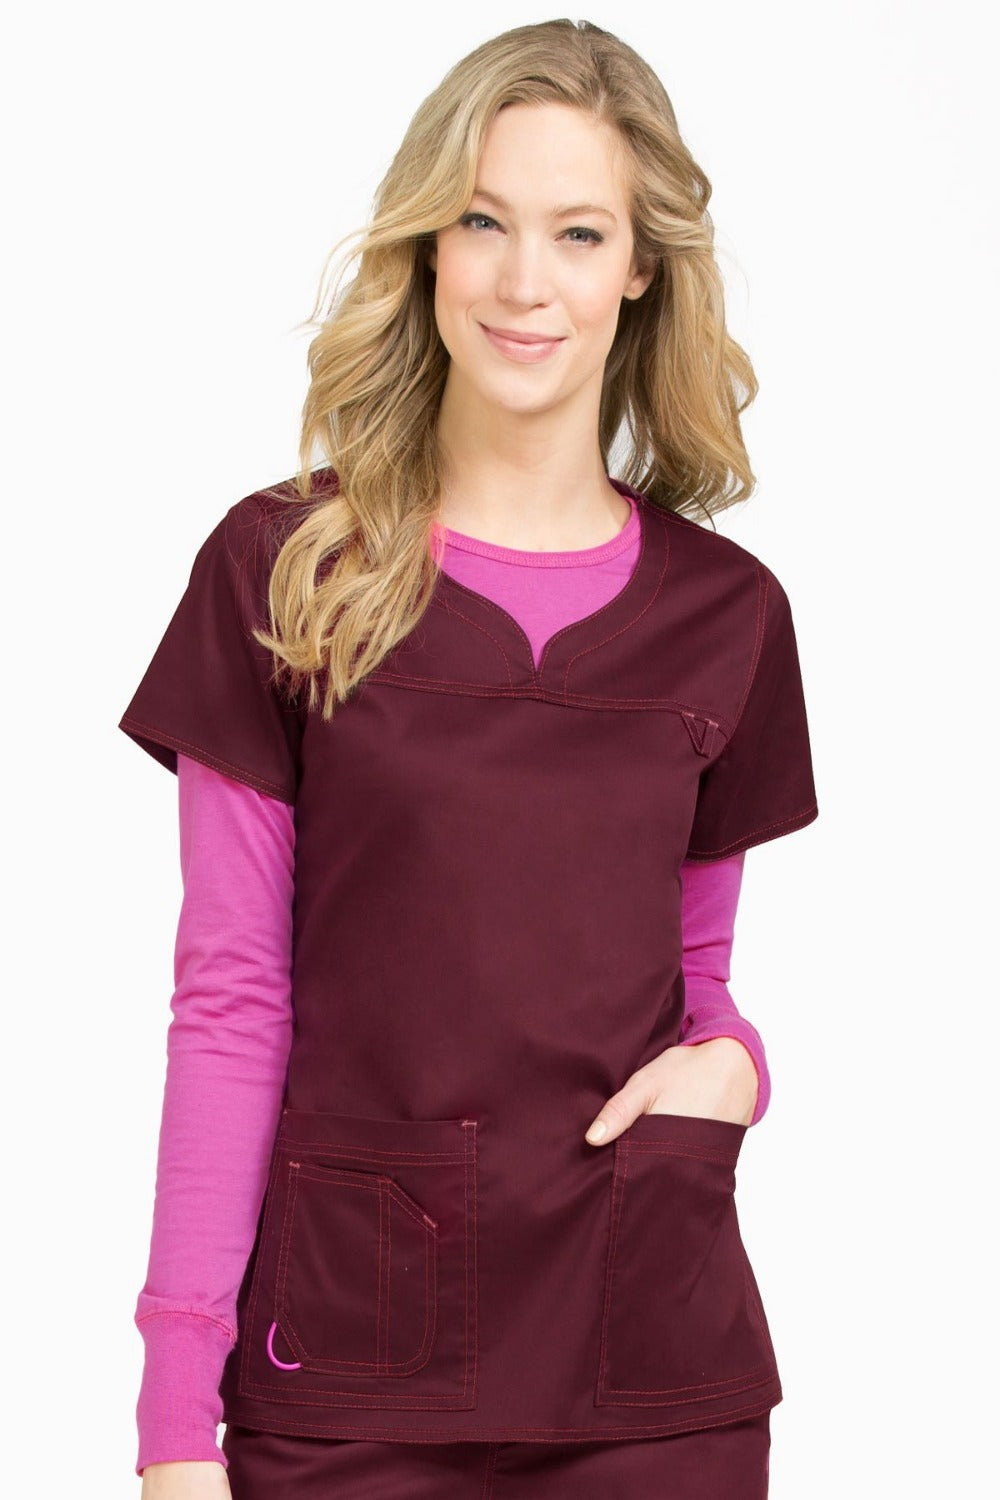 Med Couture Scrub Top MC2 Lexi in Wine at Parker's Clothing and Shoes